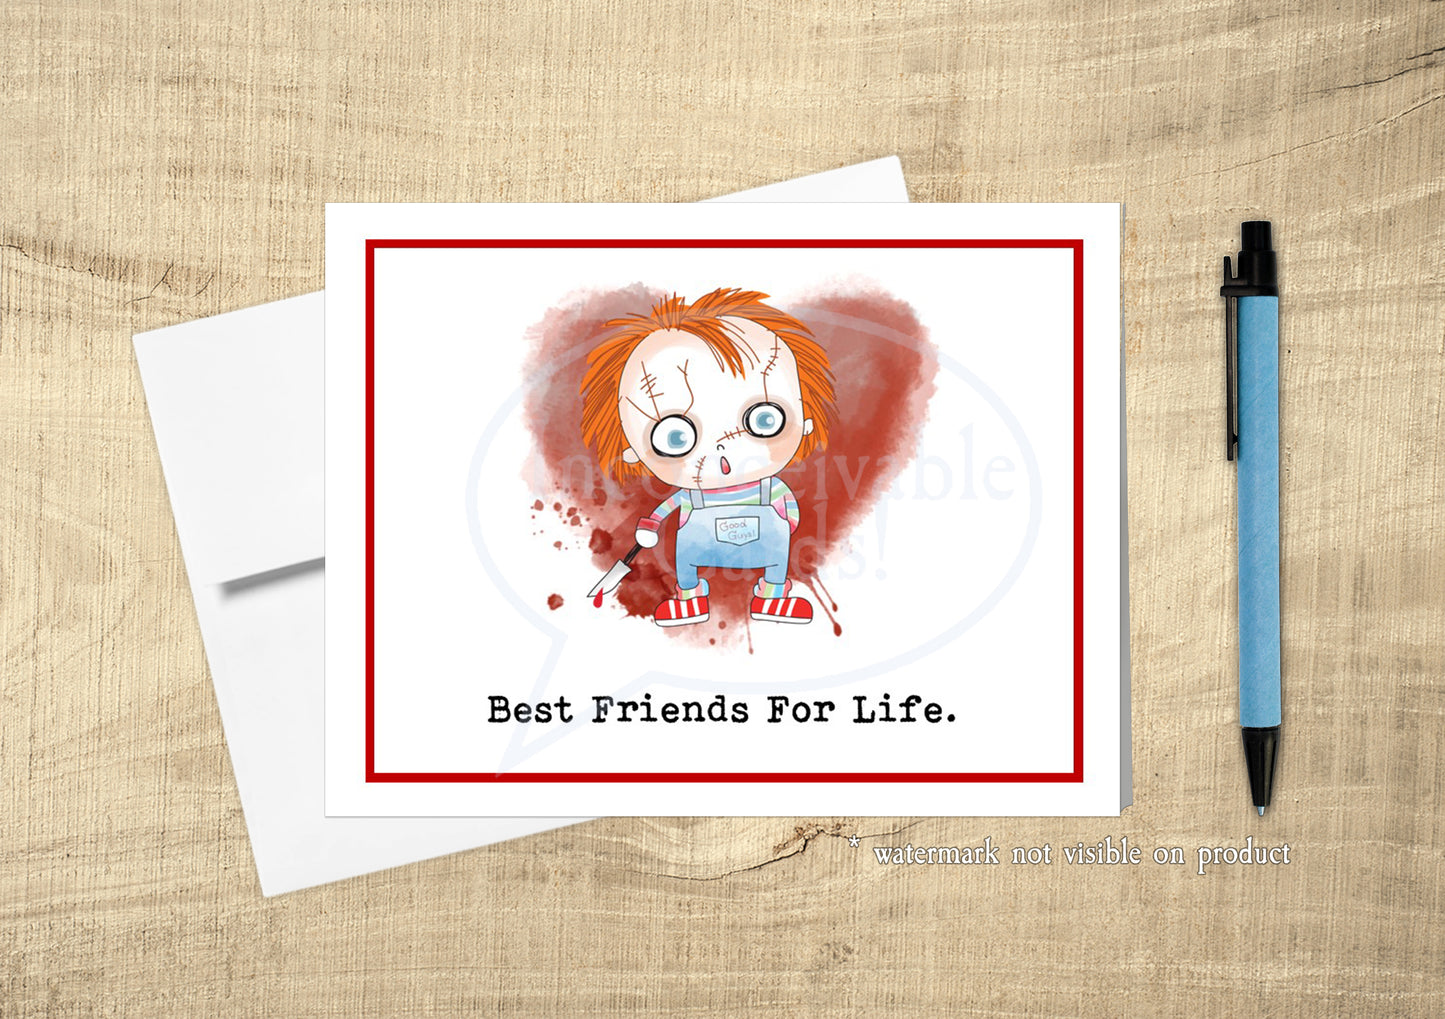 Creepy Card, Possessed Doll, Best Friends for Life Card, Birthday Card for BFF, Thinking of You Card